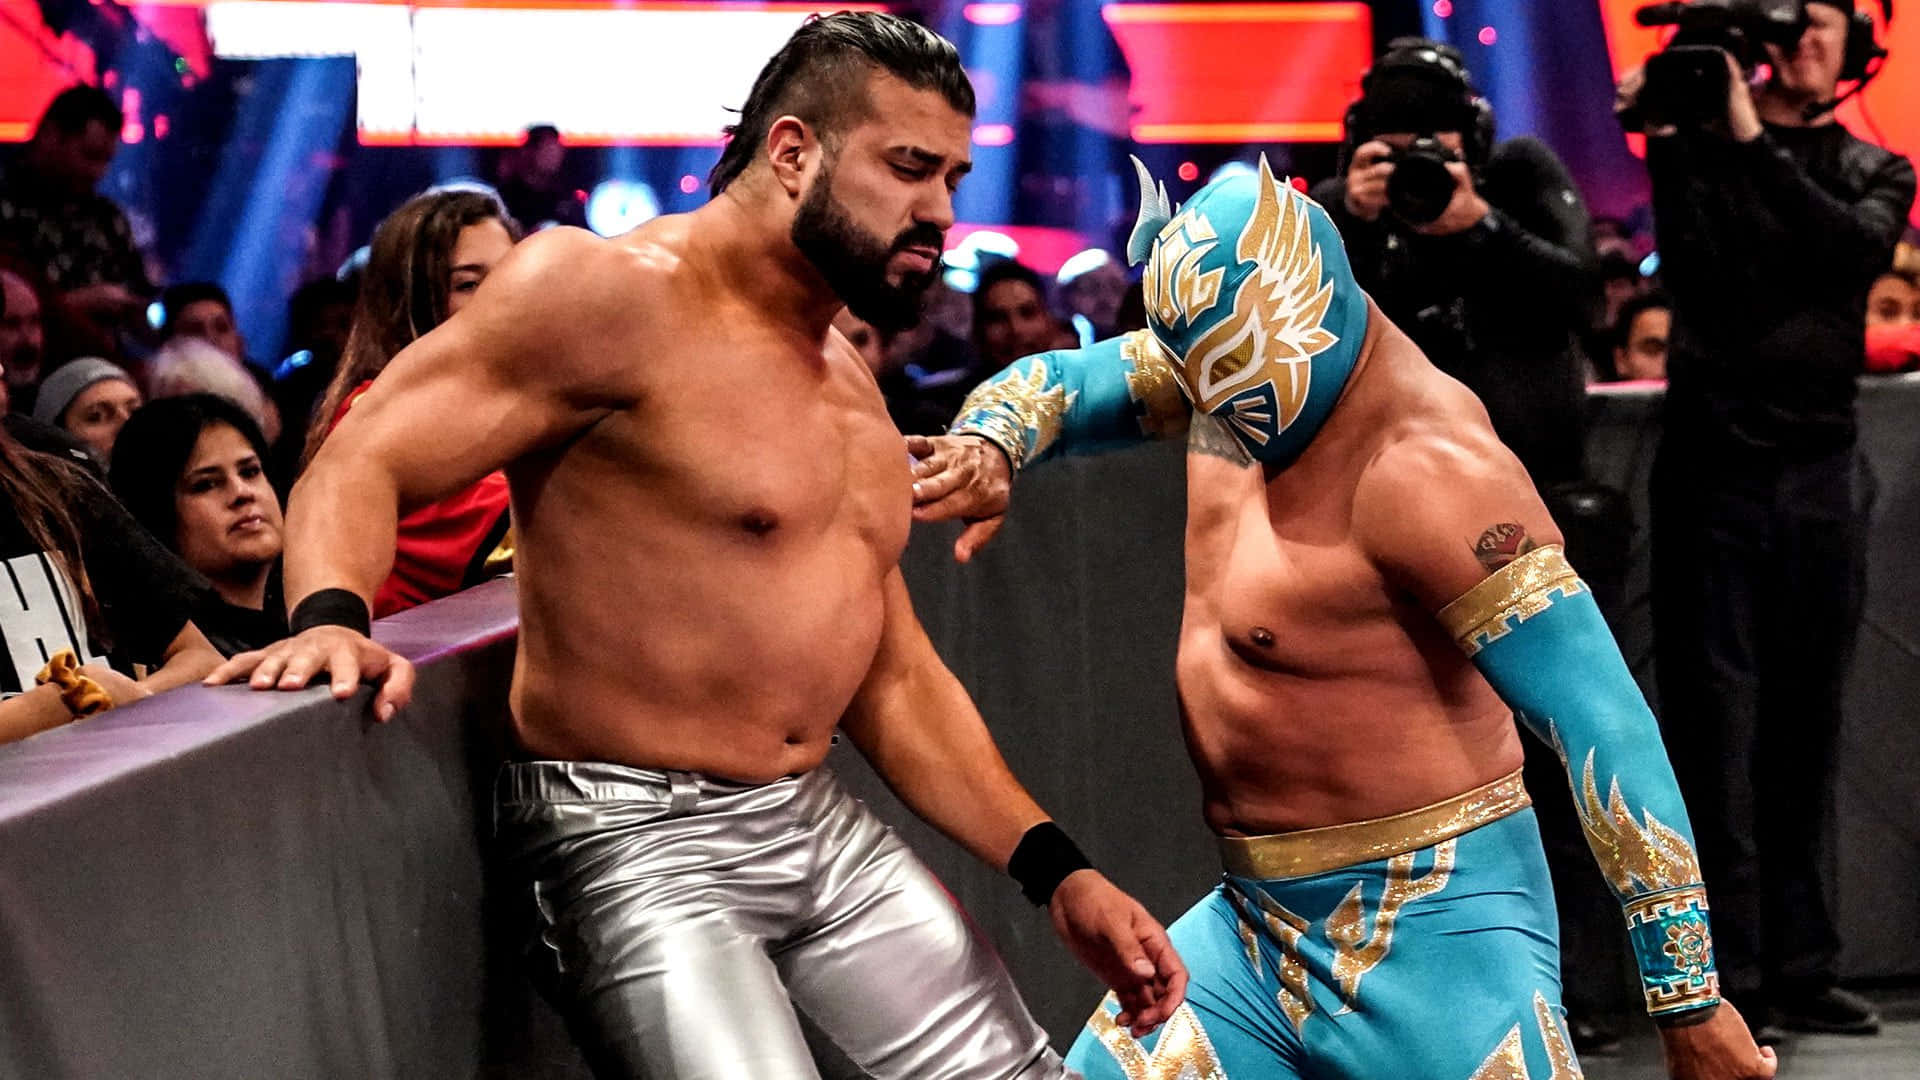 wwe superstars sin cara without mask